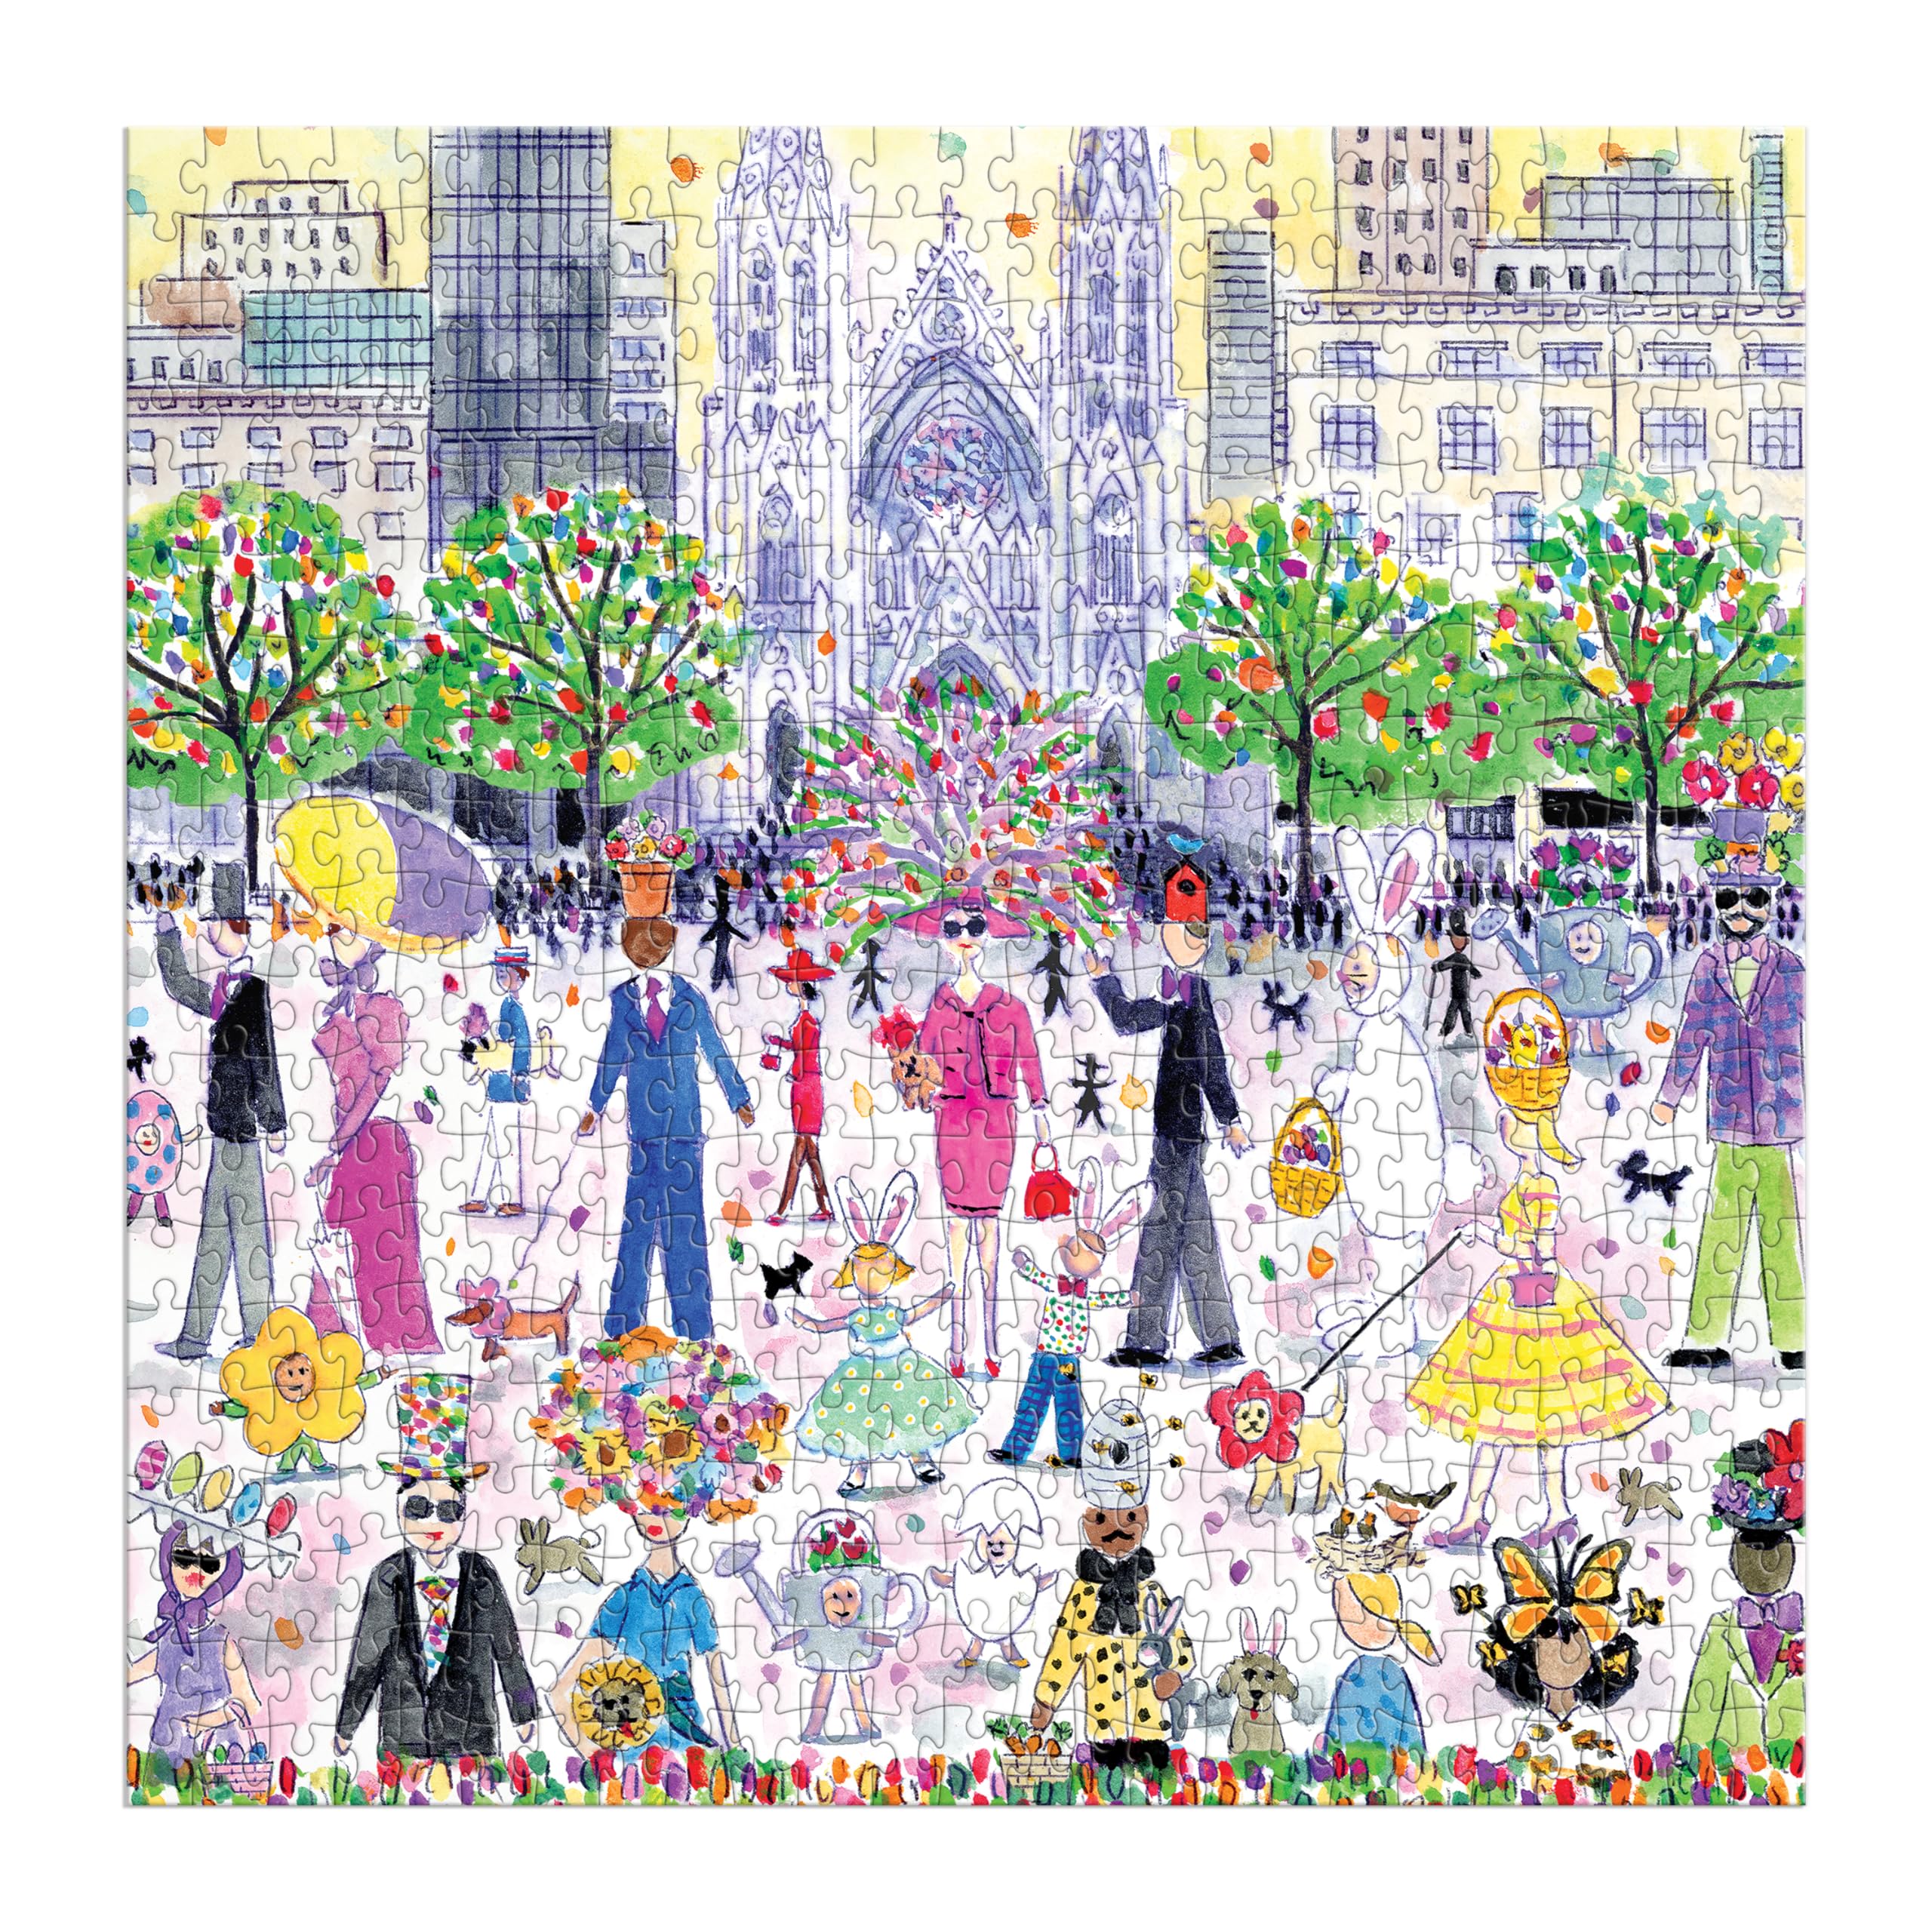 Galison Easter Parade – 500 Piece Michael Storrings Puzzle Featuring The Joy and Energy of A Springtime Easter Parade